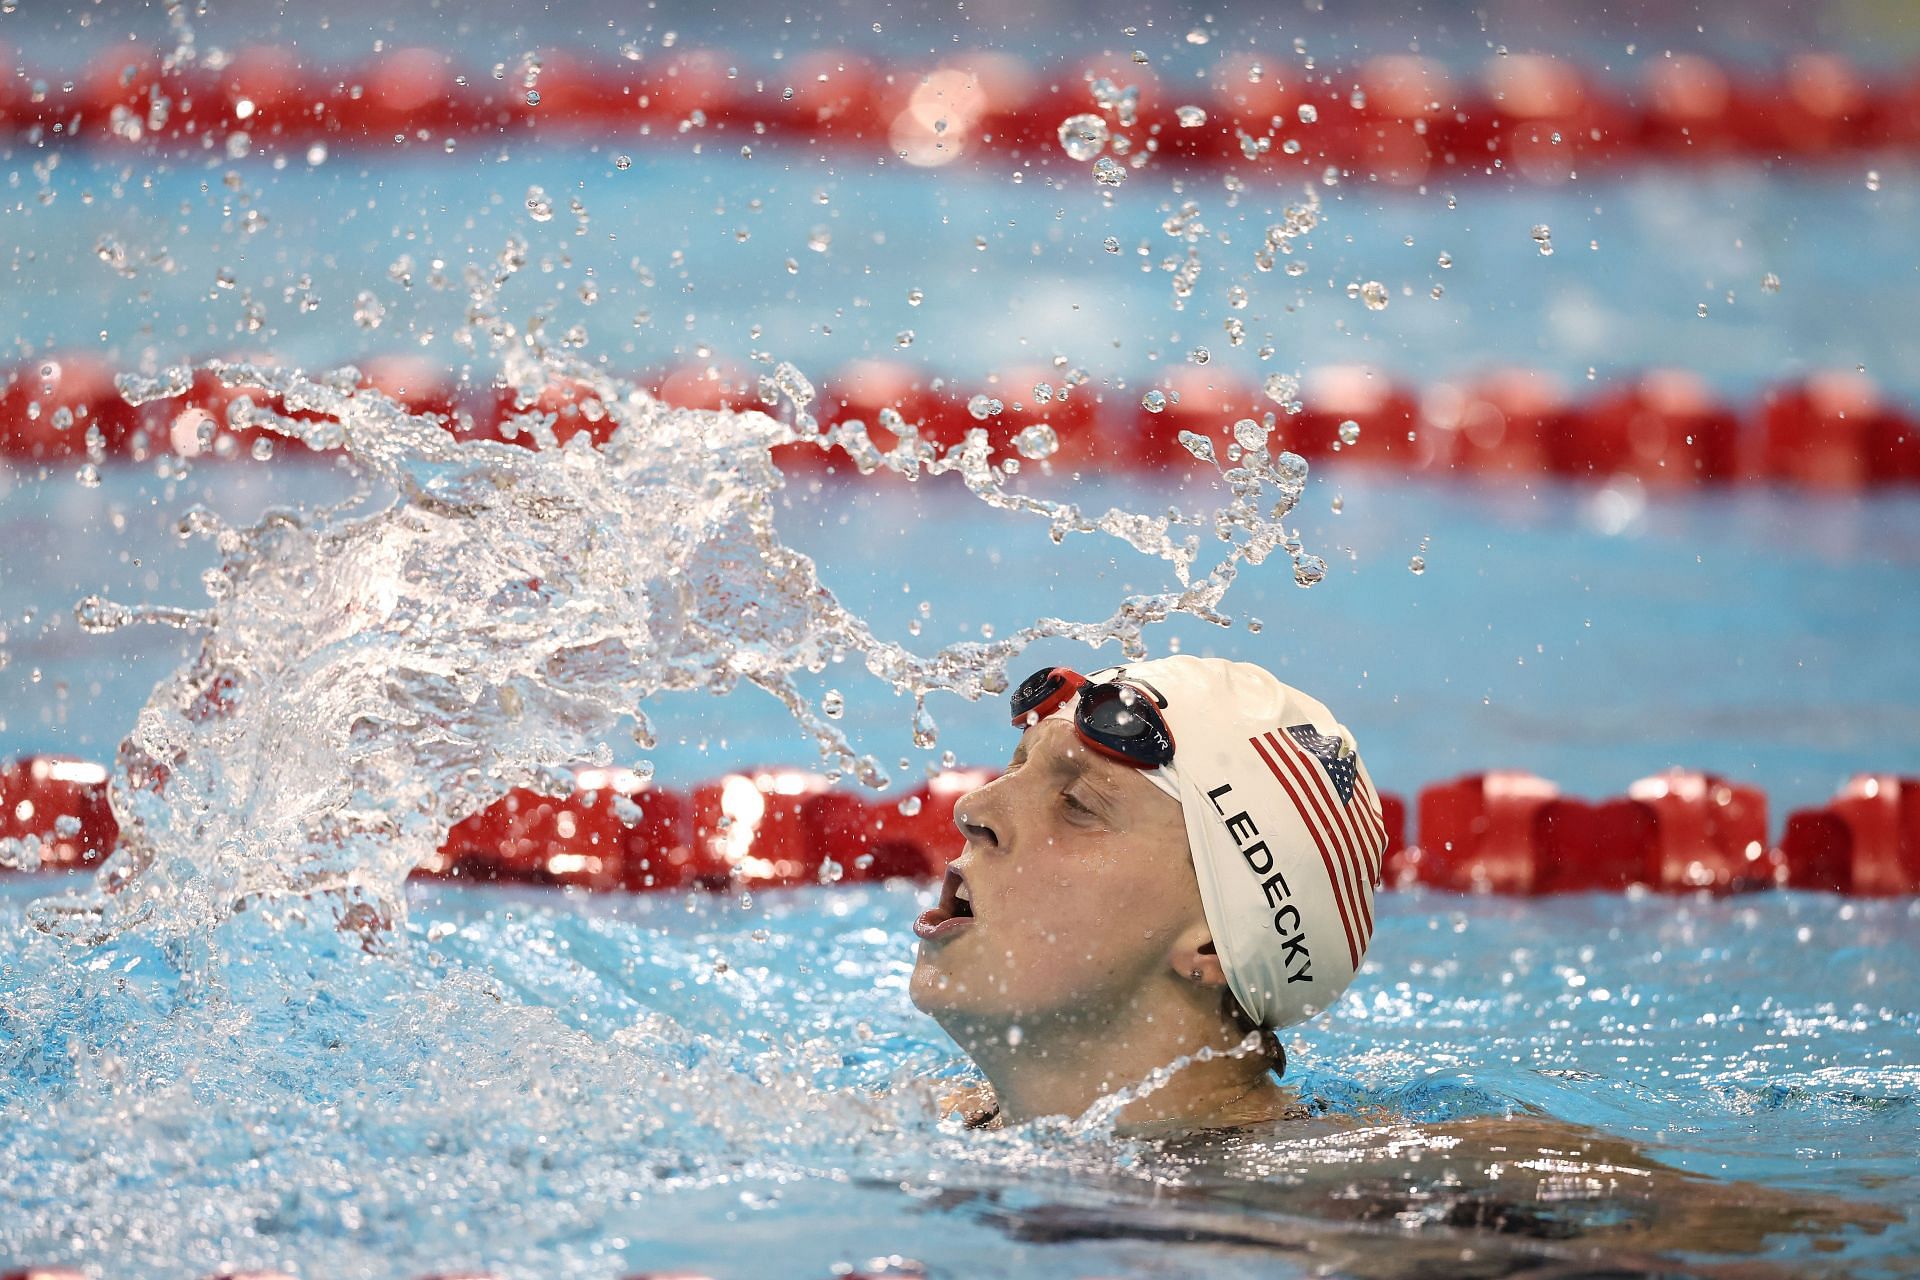 Ledecky at the FINA Swimming World Cup 2022 (Image via Getty)